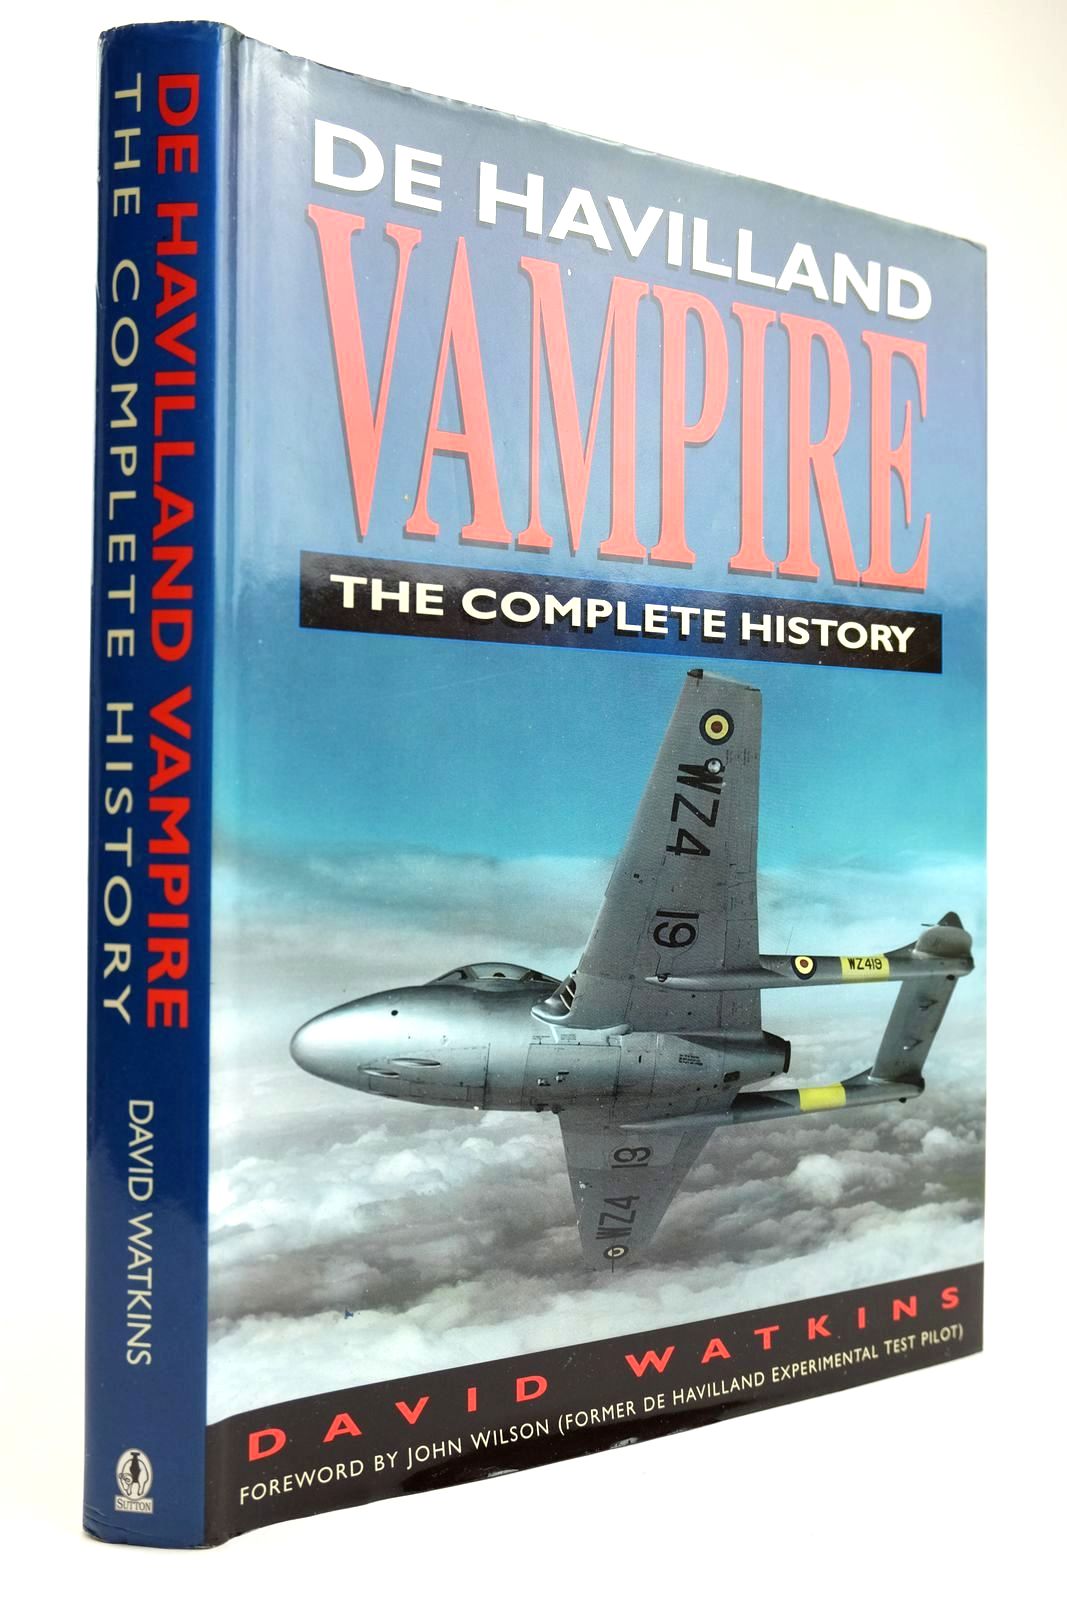 Photo of DE HAVILLAND VAMPIRE THE COMPLETE HISTORY written by Watkins, David published by Sutton Publishing (STOCK CODE: 2132176)  for sale by Stella & Rose's Books